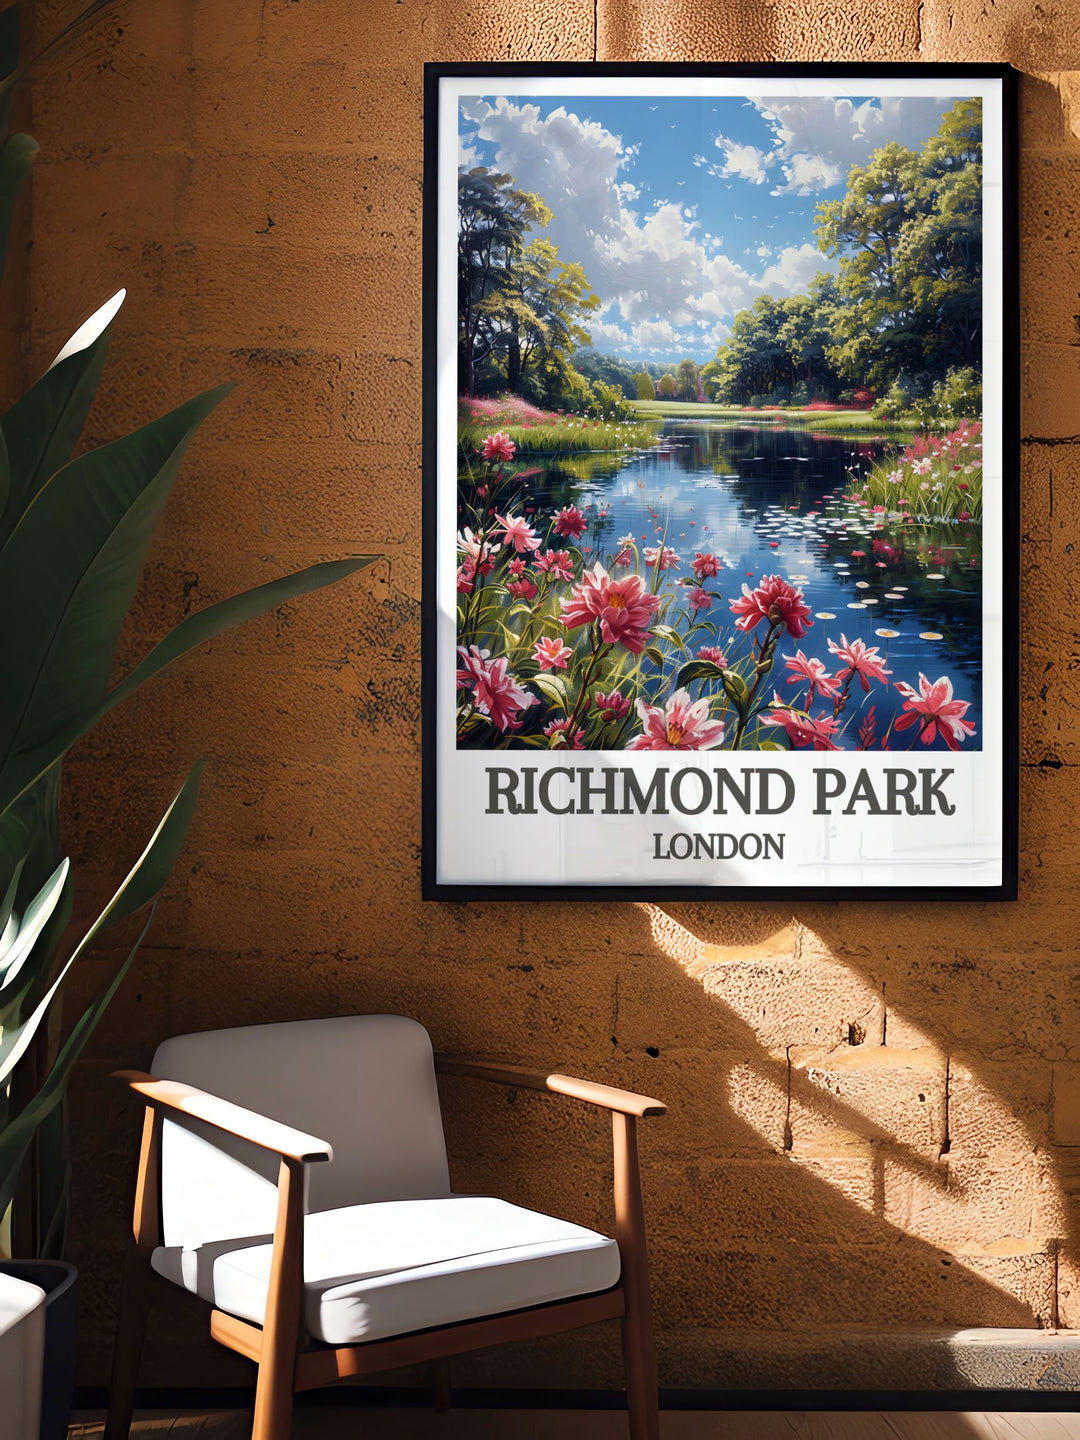 London Travel Posters featuring stunning views of Richmond Park and Isabella Plantation, capturing the essence of Londons natural landscapes.